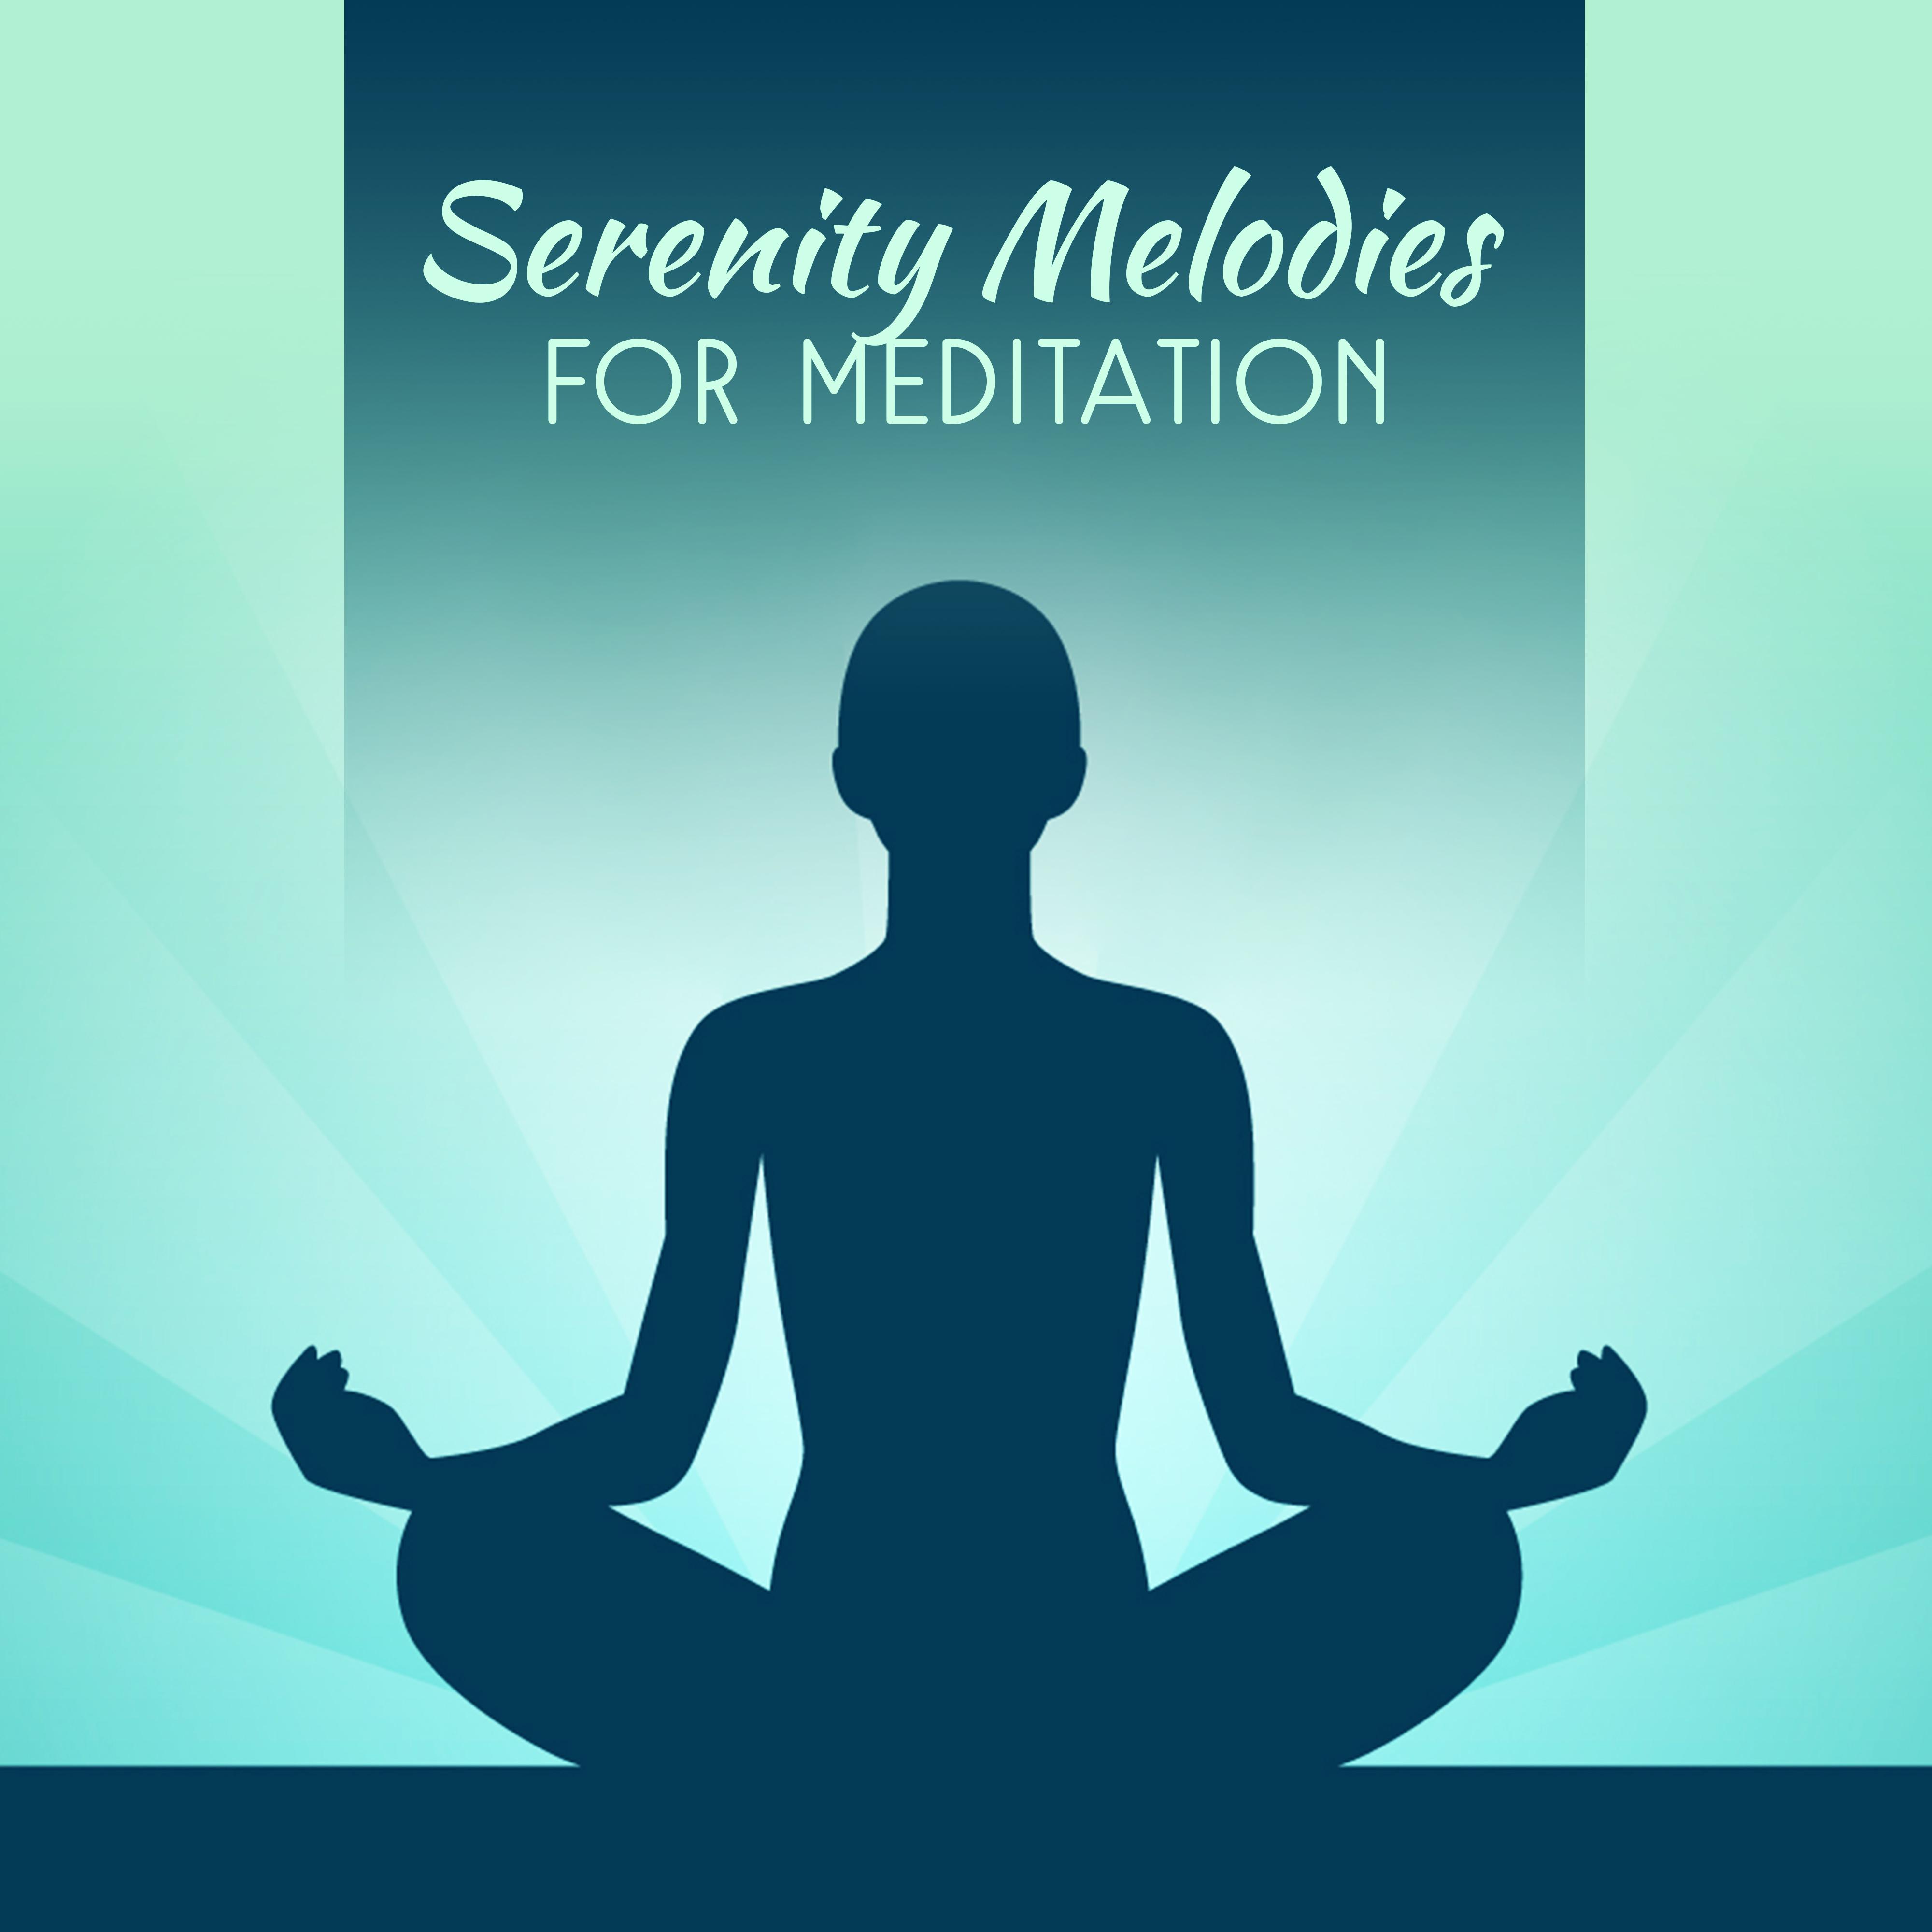 Serenity Melodies for Meditation